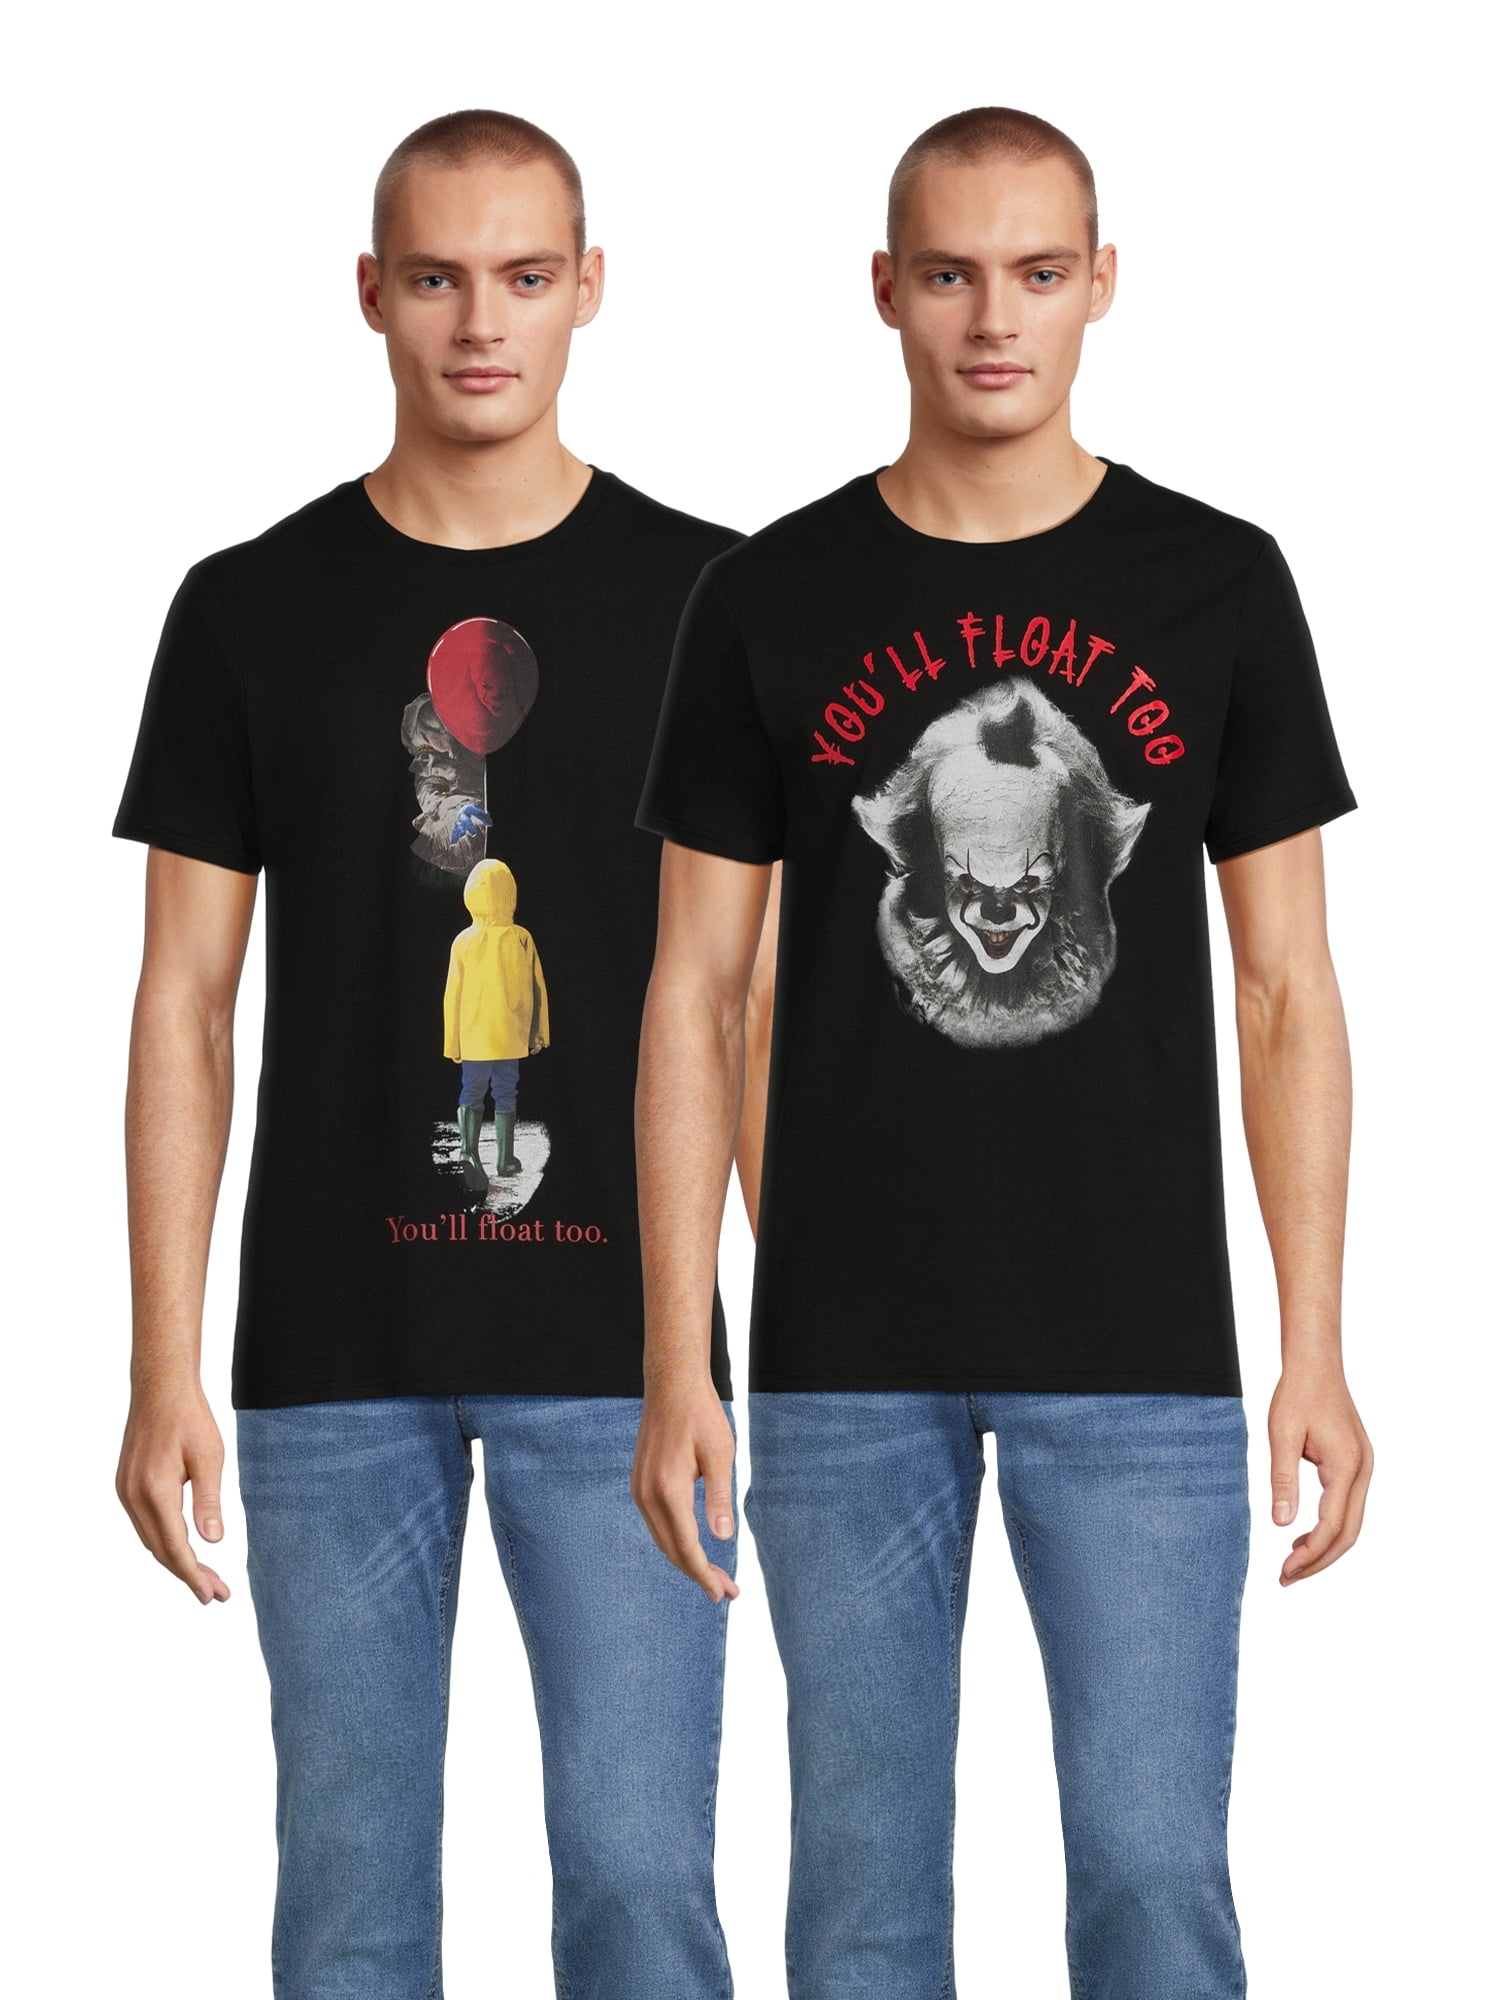 Stephen King Clown It Pennywise Men\'s and Big Men\'s Halloween Graphic Tees,  2-Pack, Sizes S-3XL